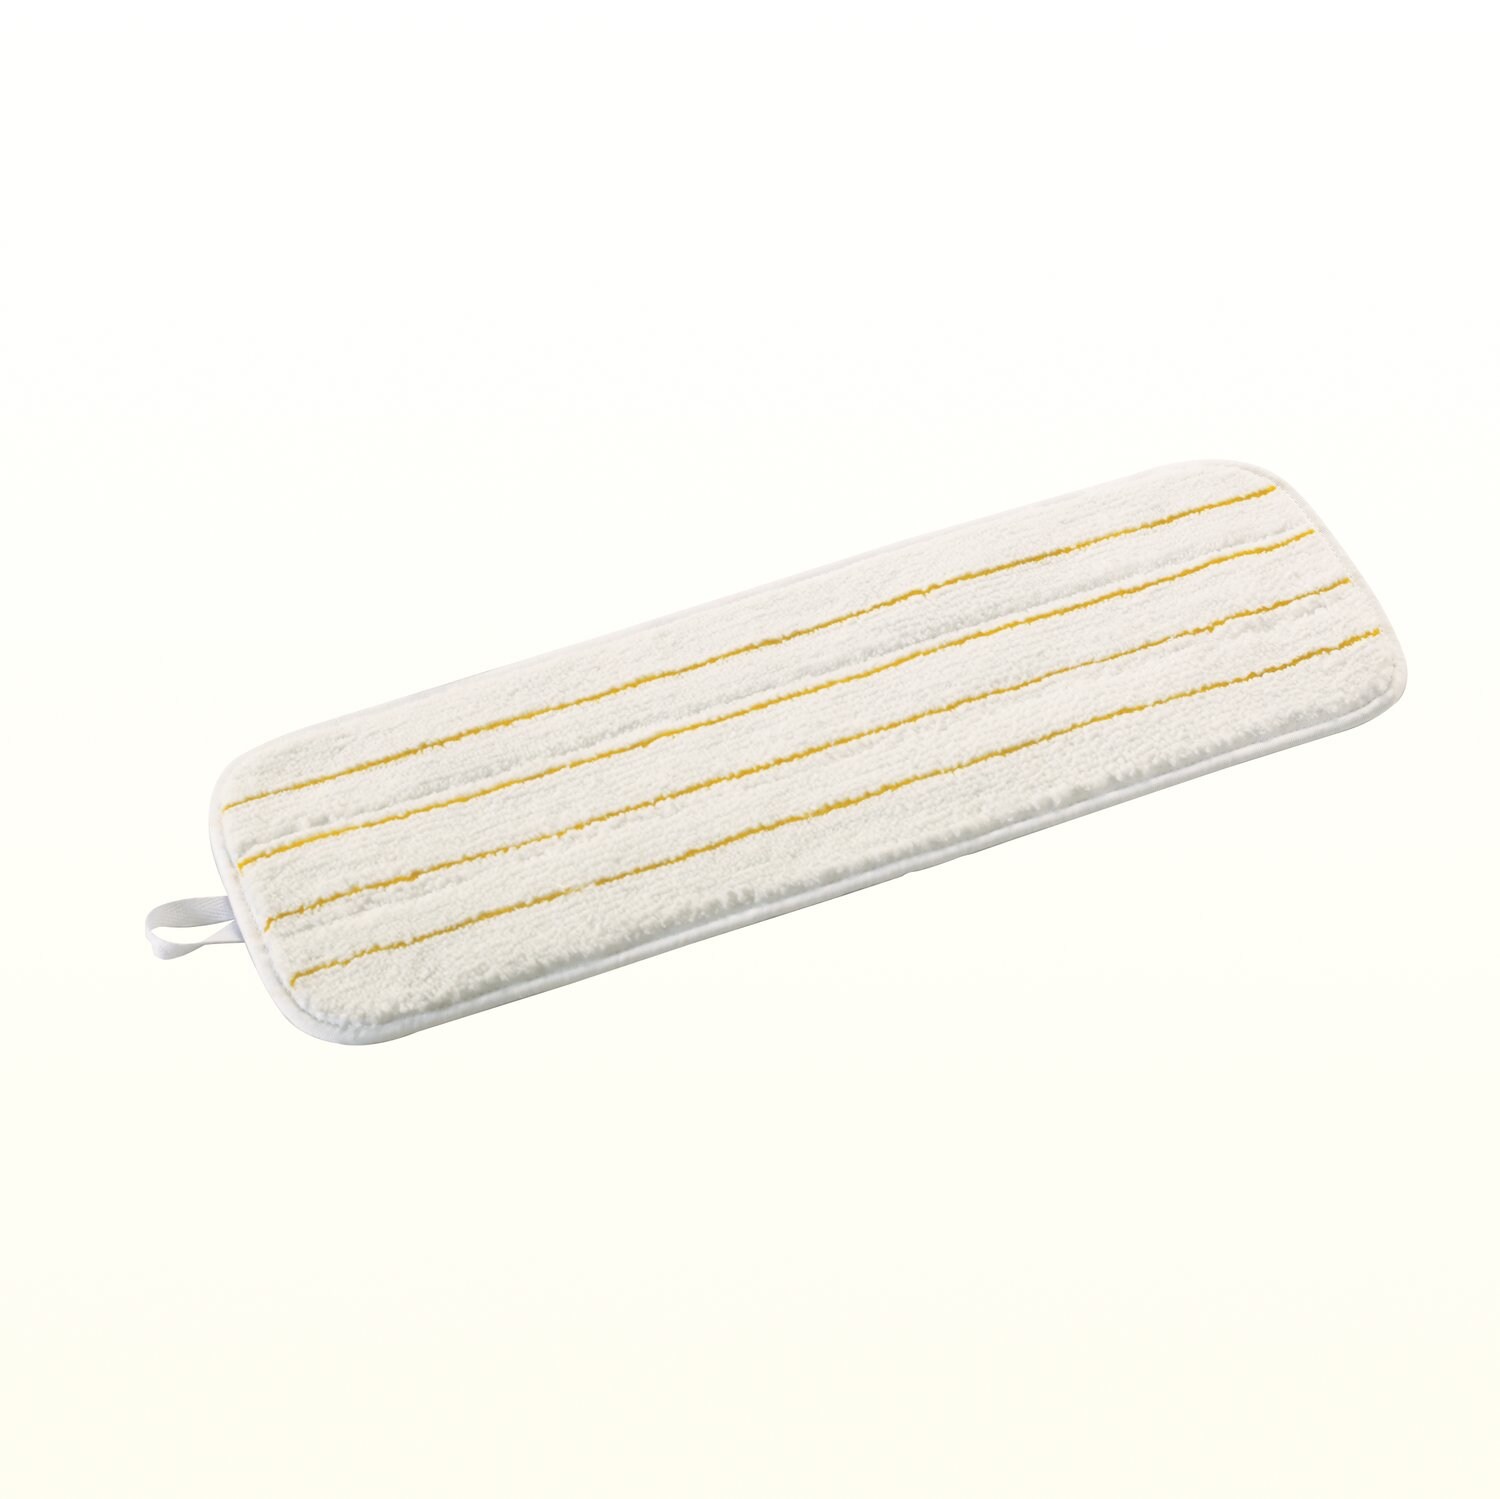 7000127861 - 3M Easy Shine Applicator Pad, White With Yellow Stripes, 18 in, 10/Case